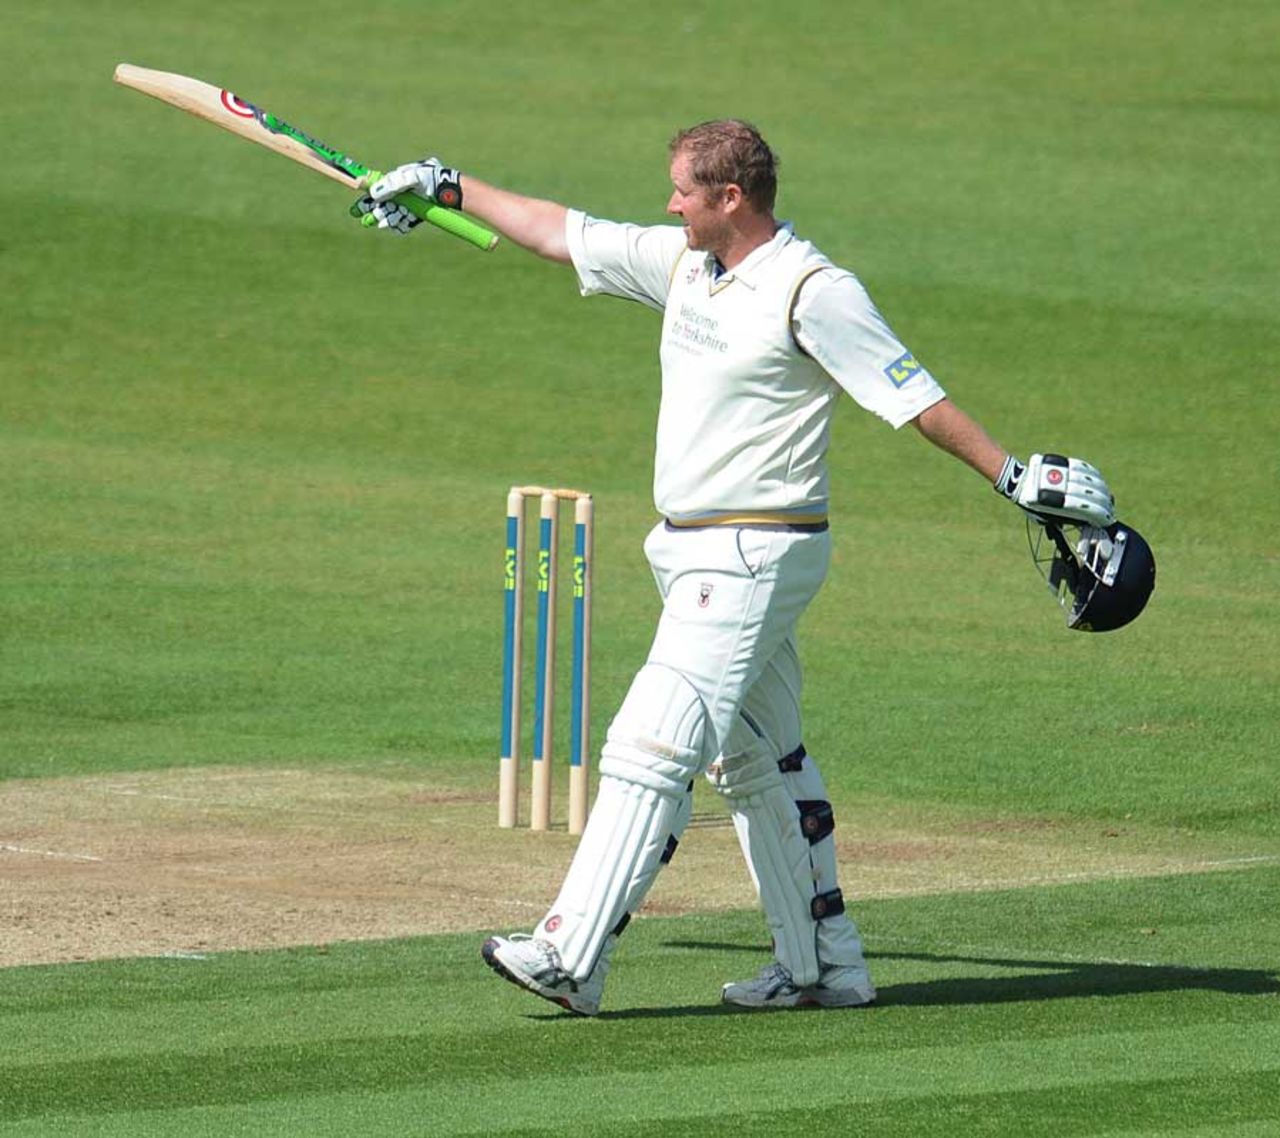 Anthony McGrath scored a brilliant hundred to give Yorkshire the lead against Durham, Durham v Yorkshire, County Championship, Division One, Chester-le-Street, August 17, 2010